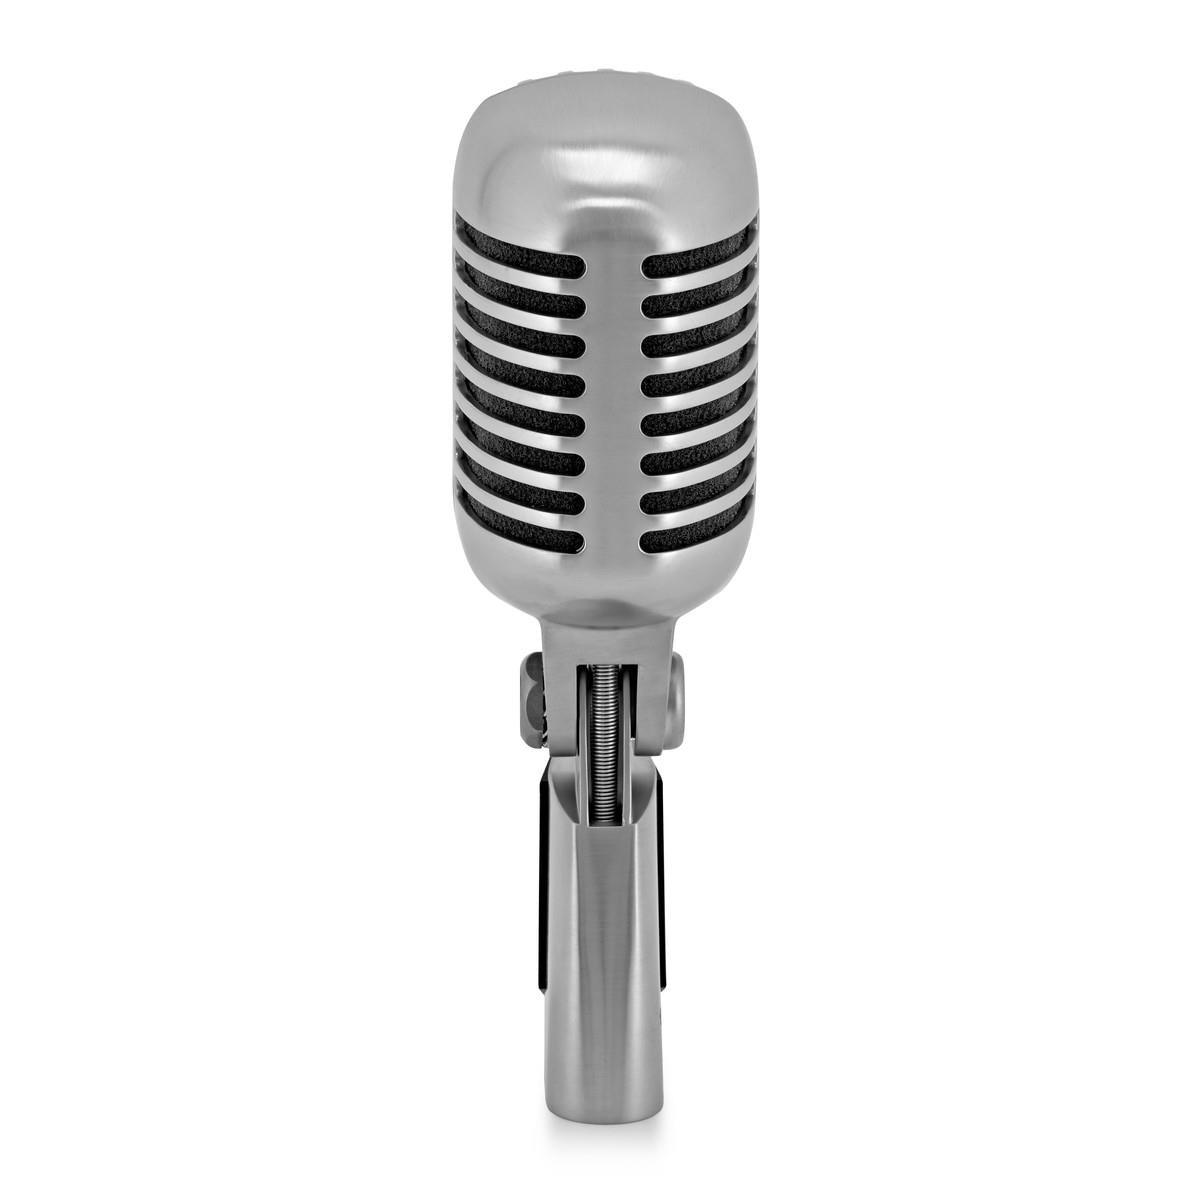 Shure 55SH Series II Vocal Microphone - DY Pro Audio